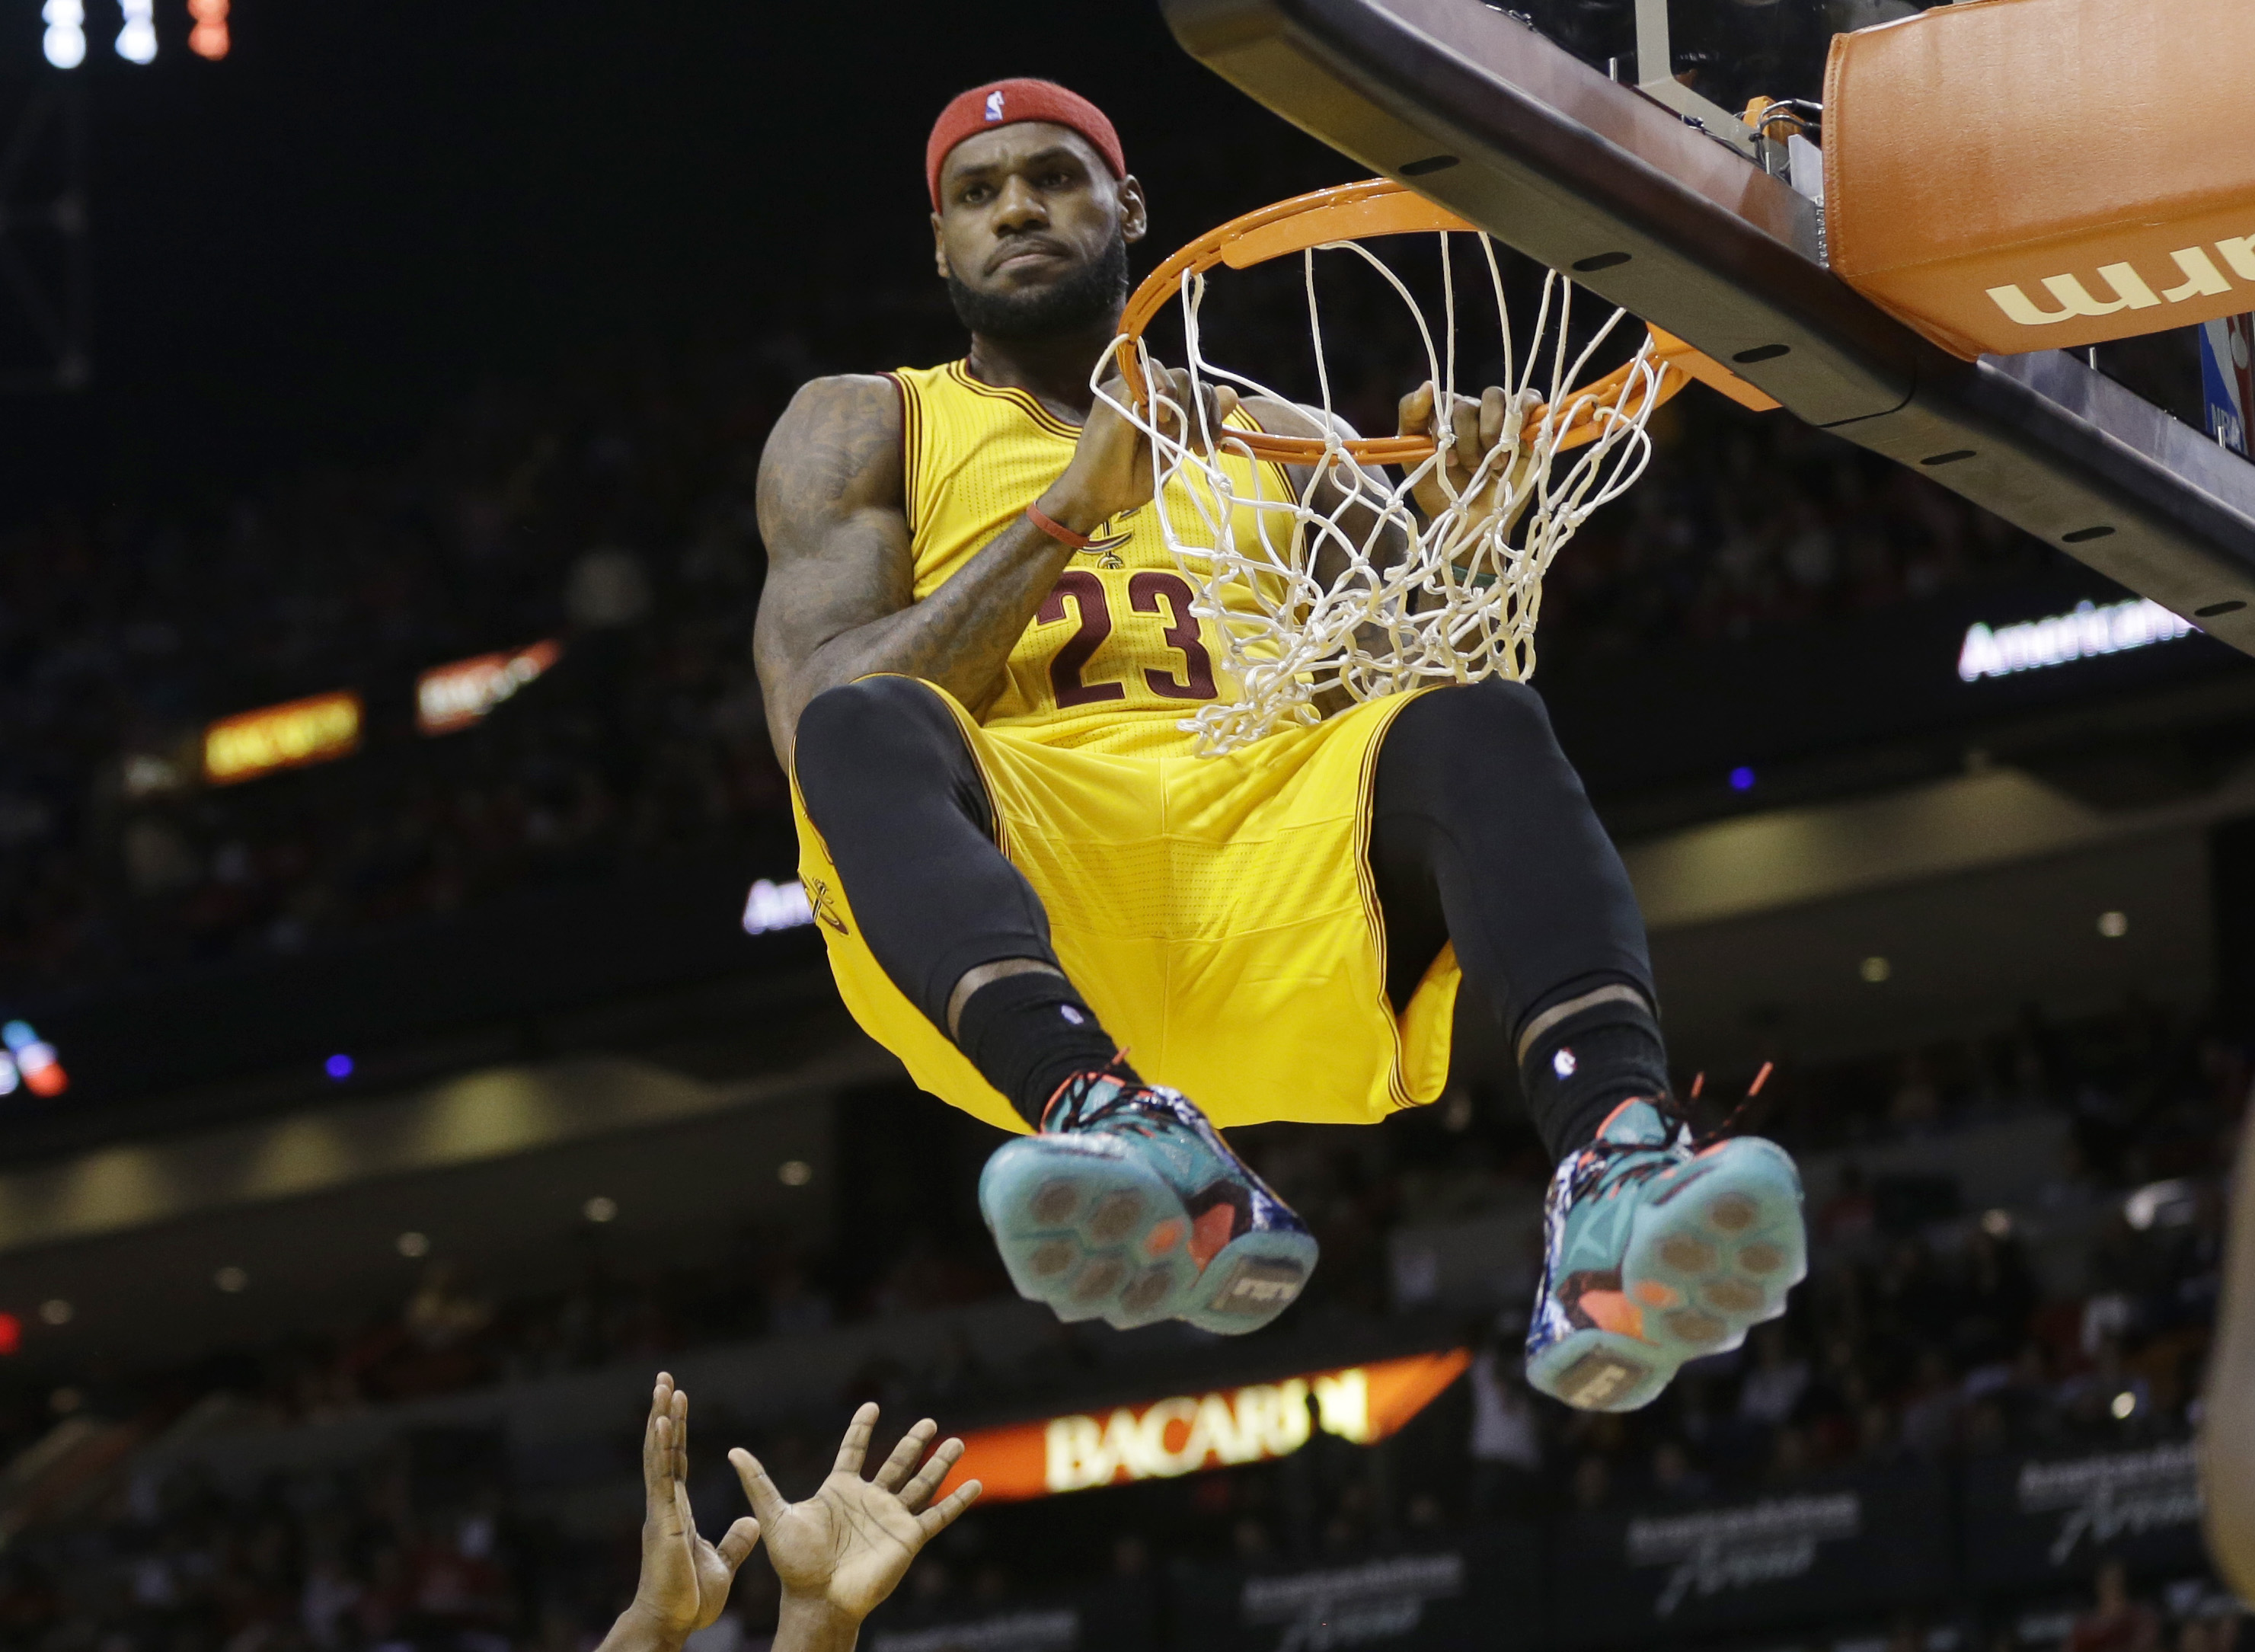 NBA: LeBron leads voting for All-Star Game starters | Inquirer Sports